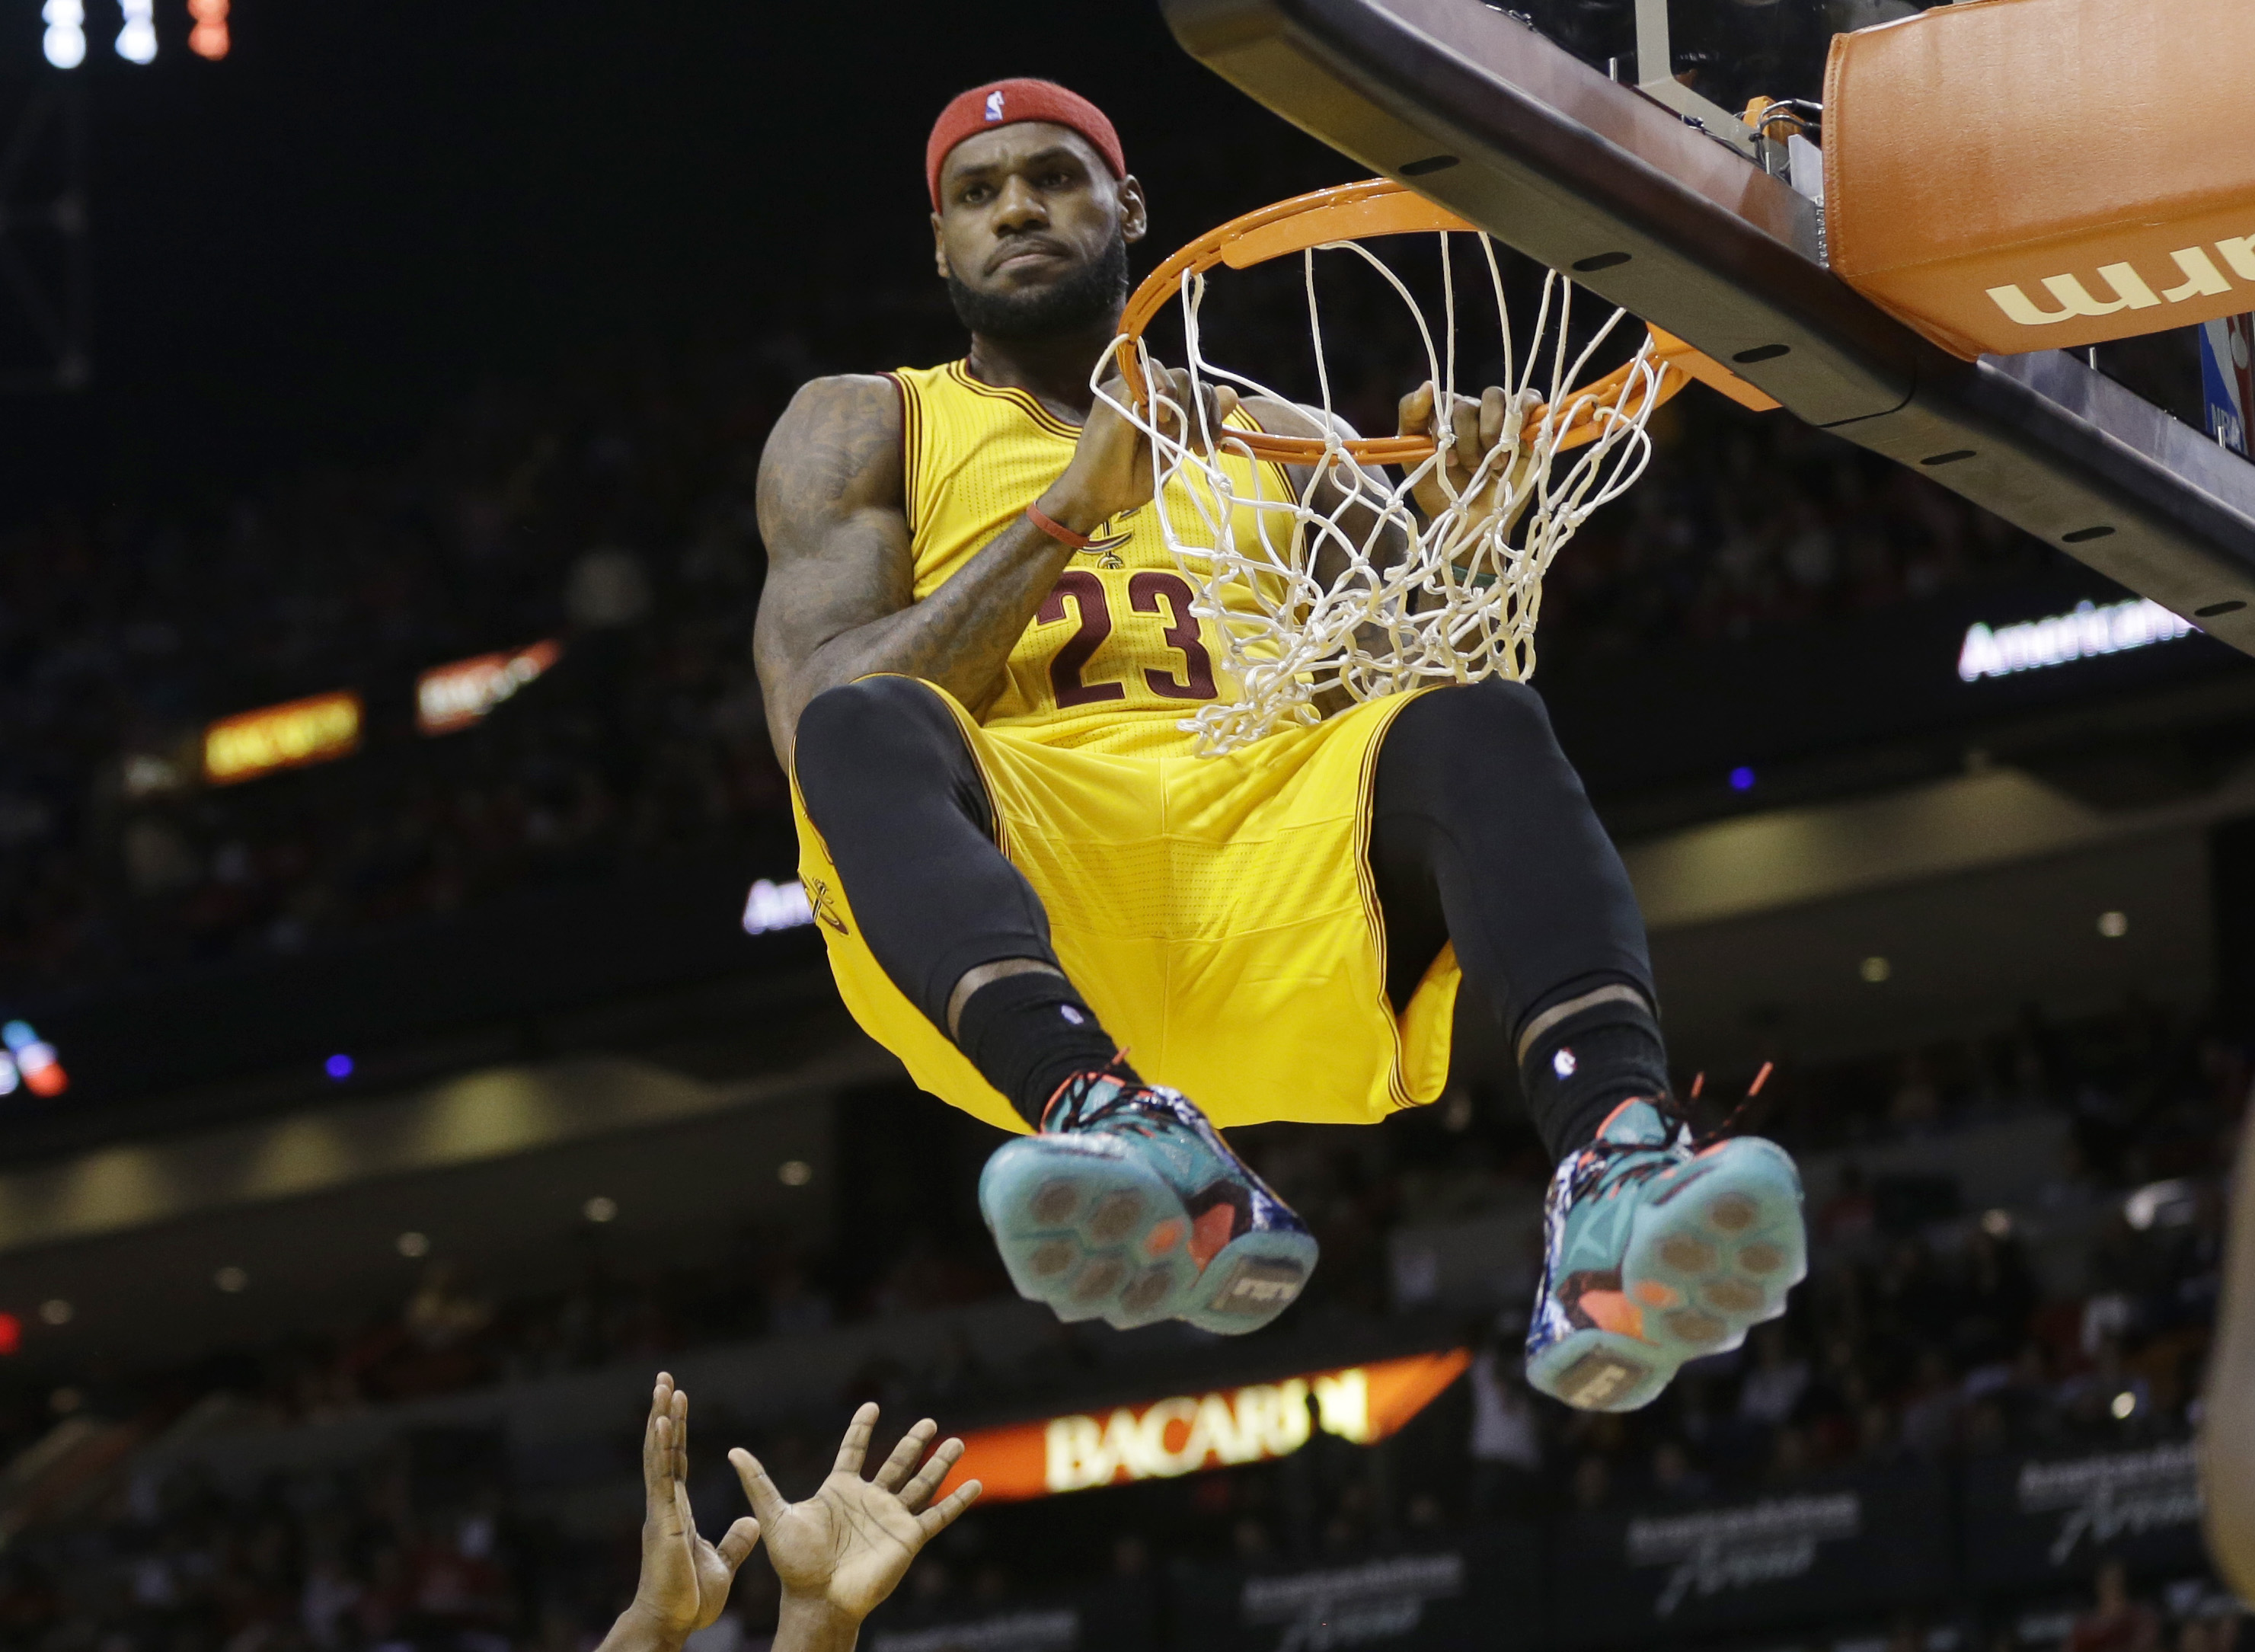 NBA: LeBron leads voting for All-Star Game starters | Inquirer Sports